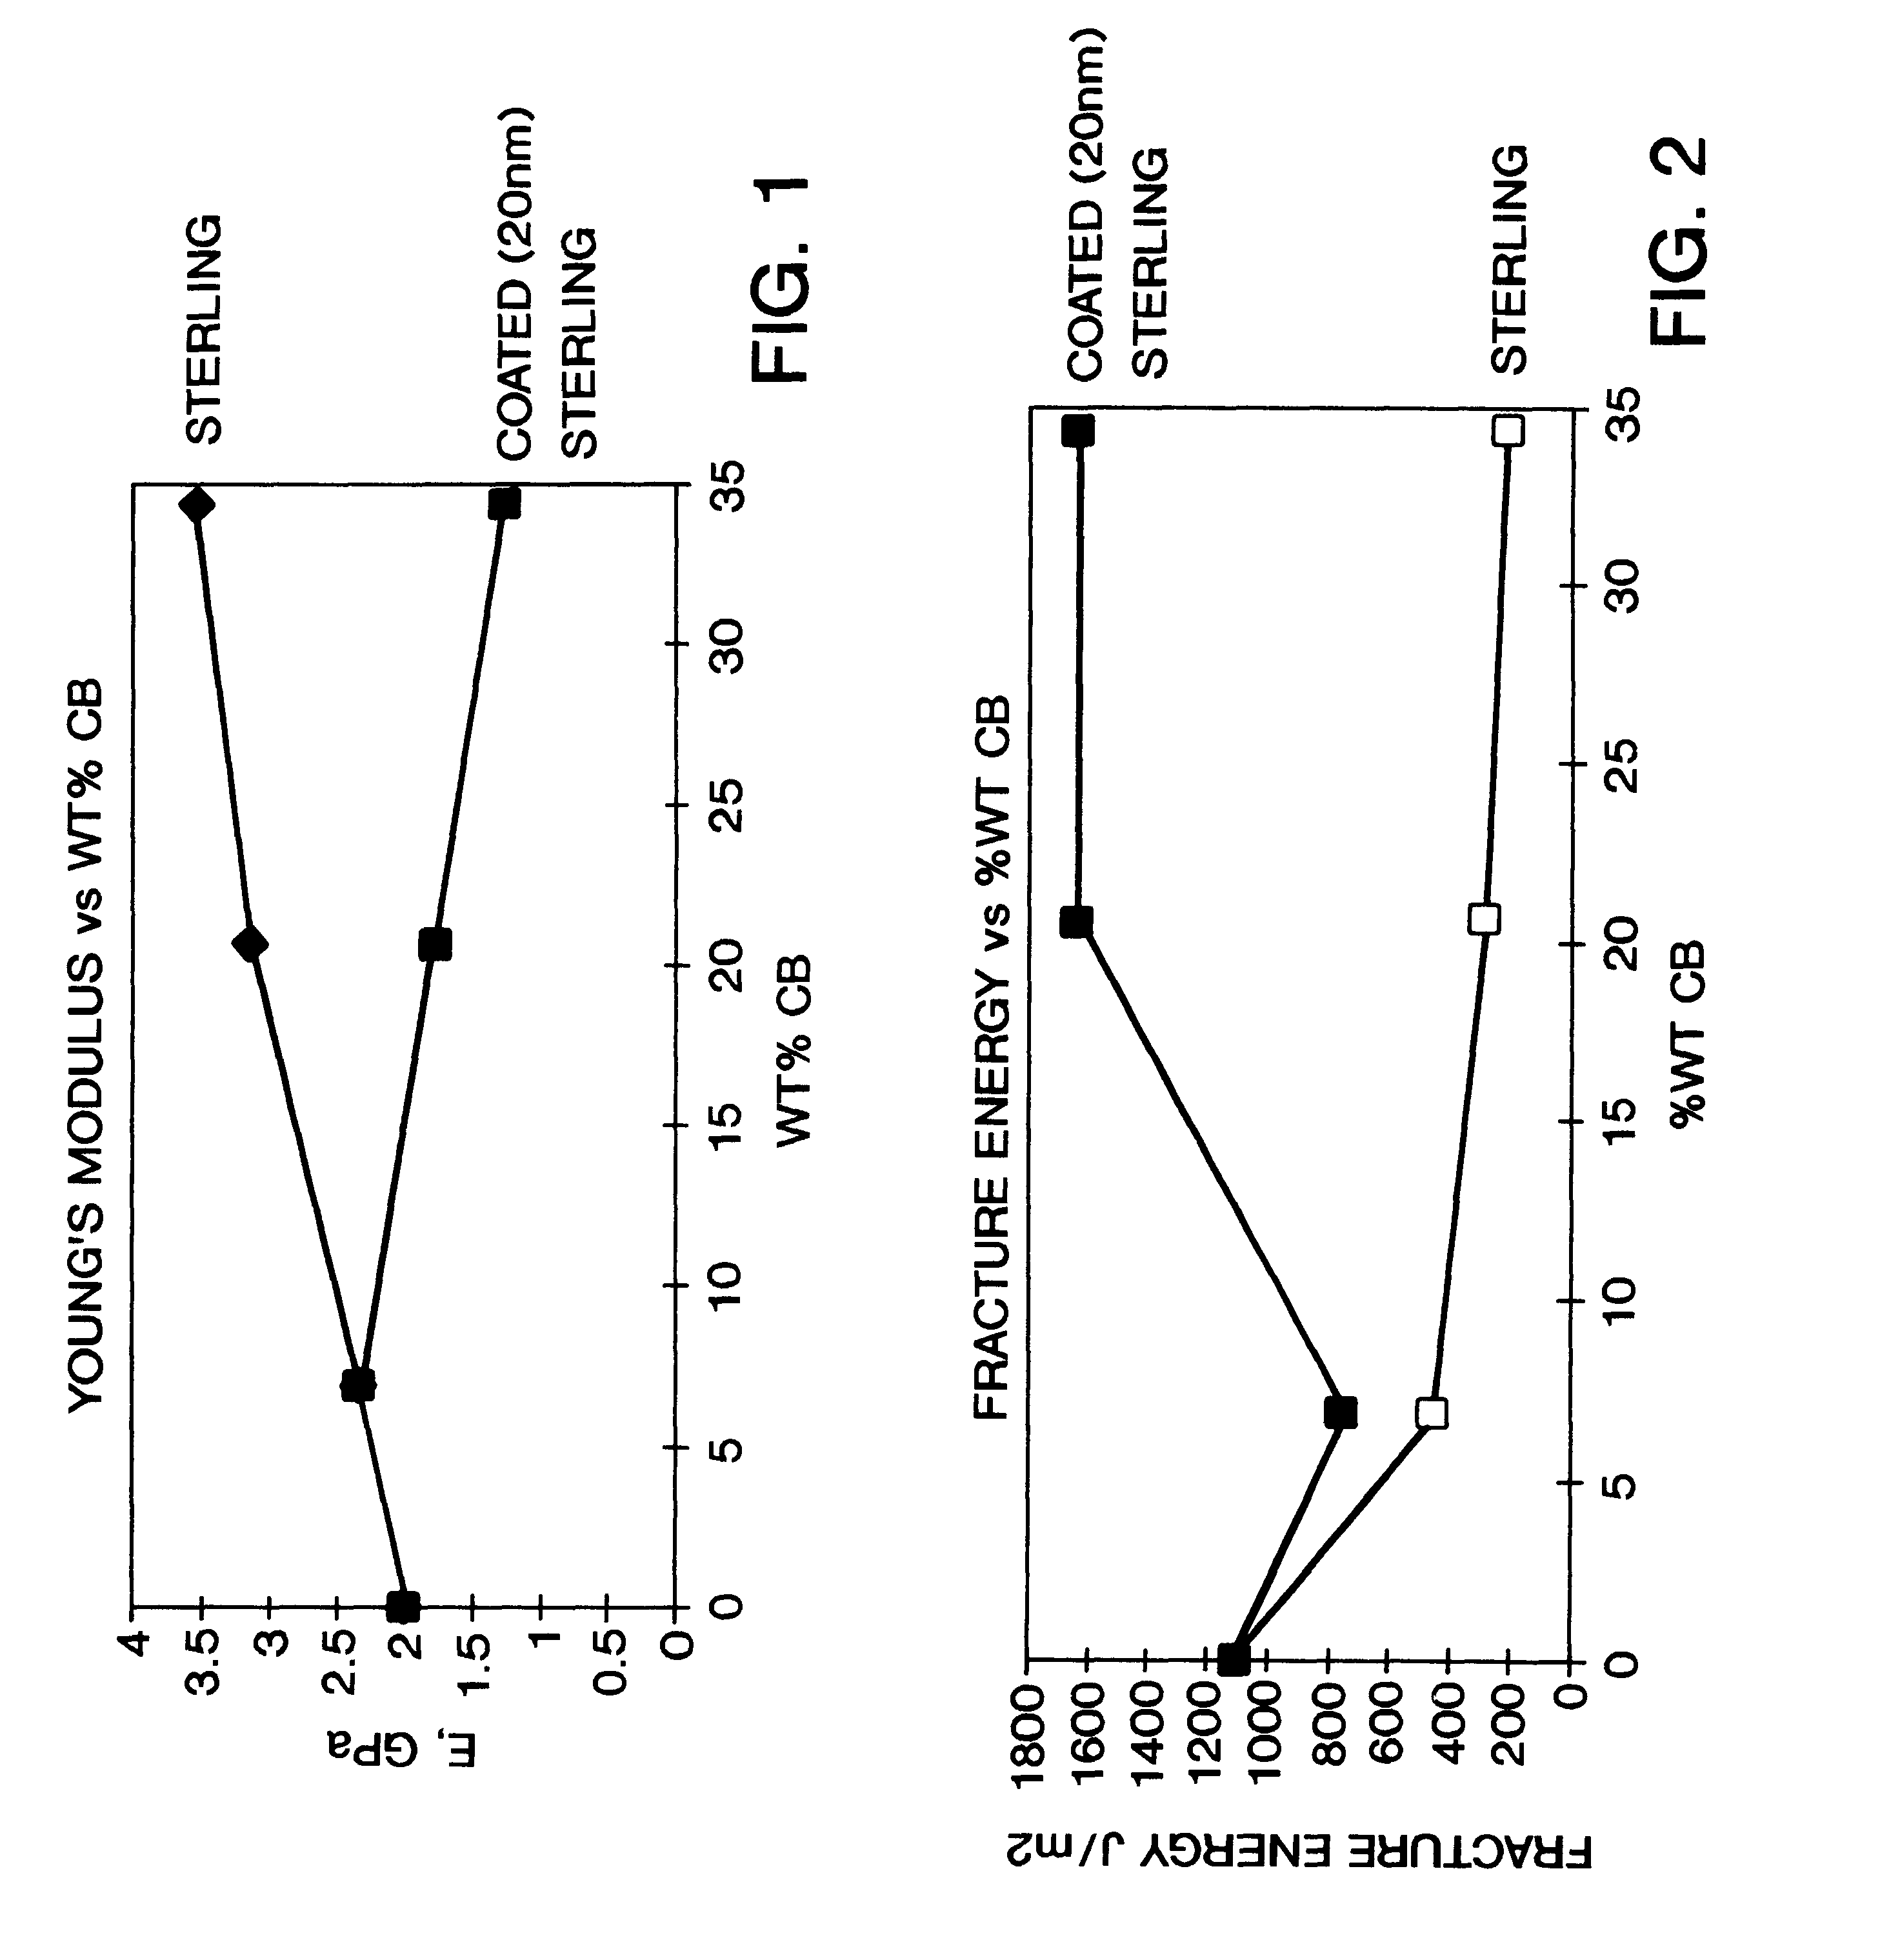 Polymer coated carbon products and other pigments and methods of making same by aqueous media polymerizations or solvent coating methods